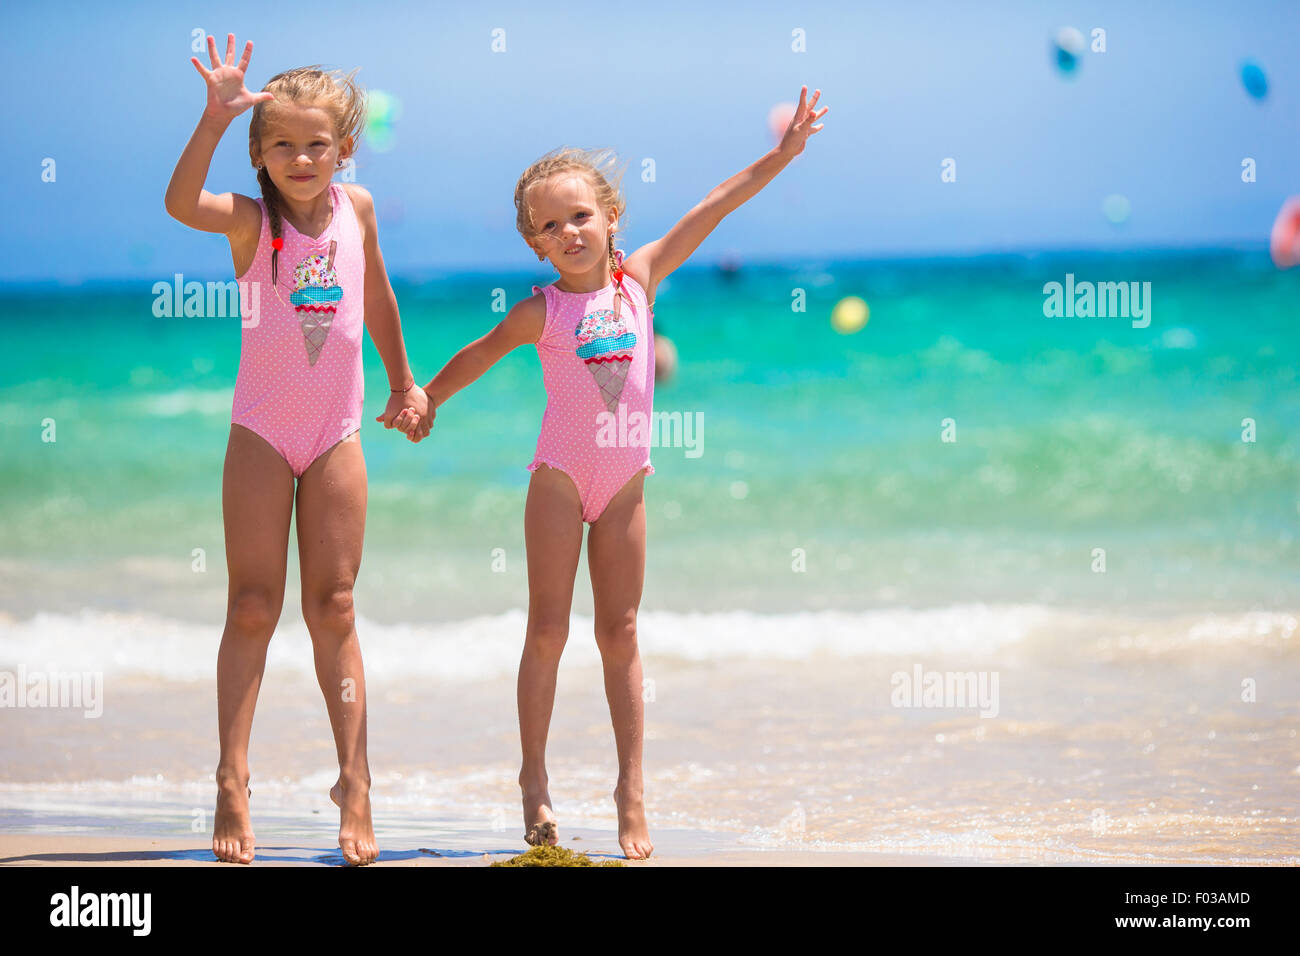 Adorable little girls having fun during beach vacation Stock Photo - Alamy